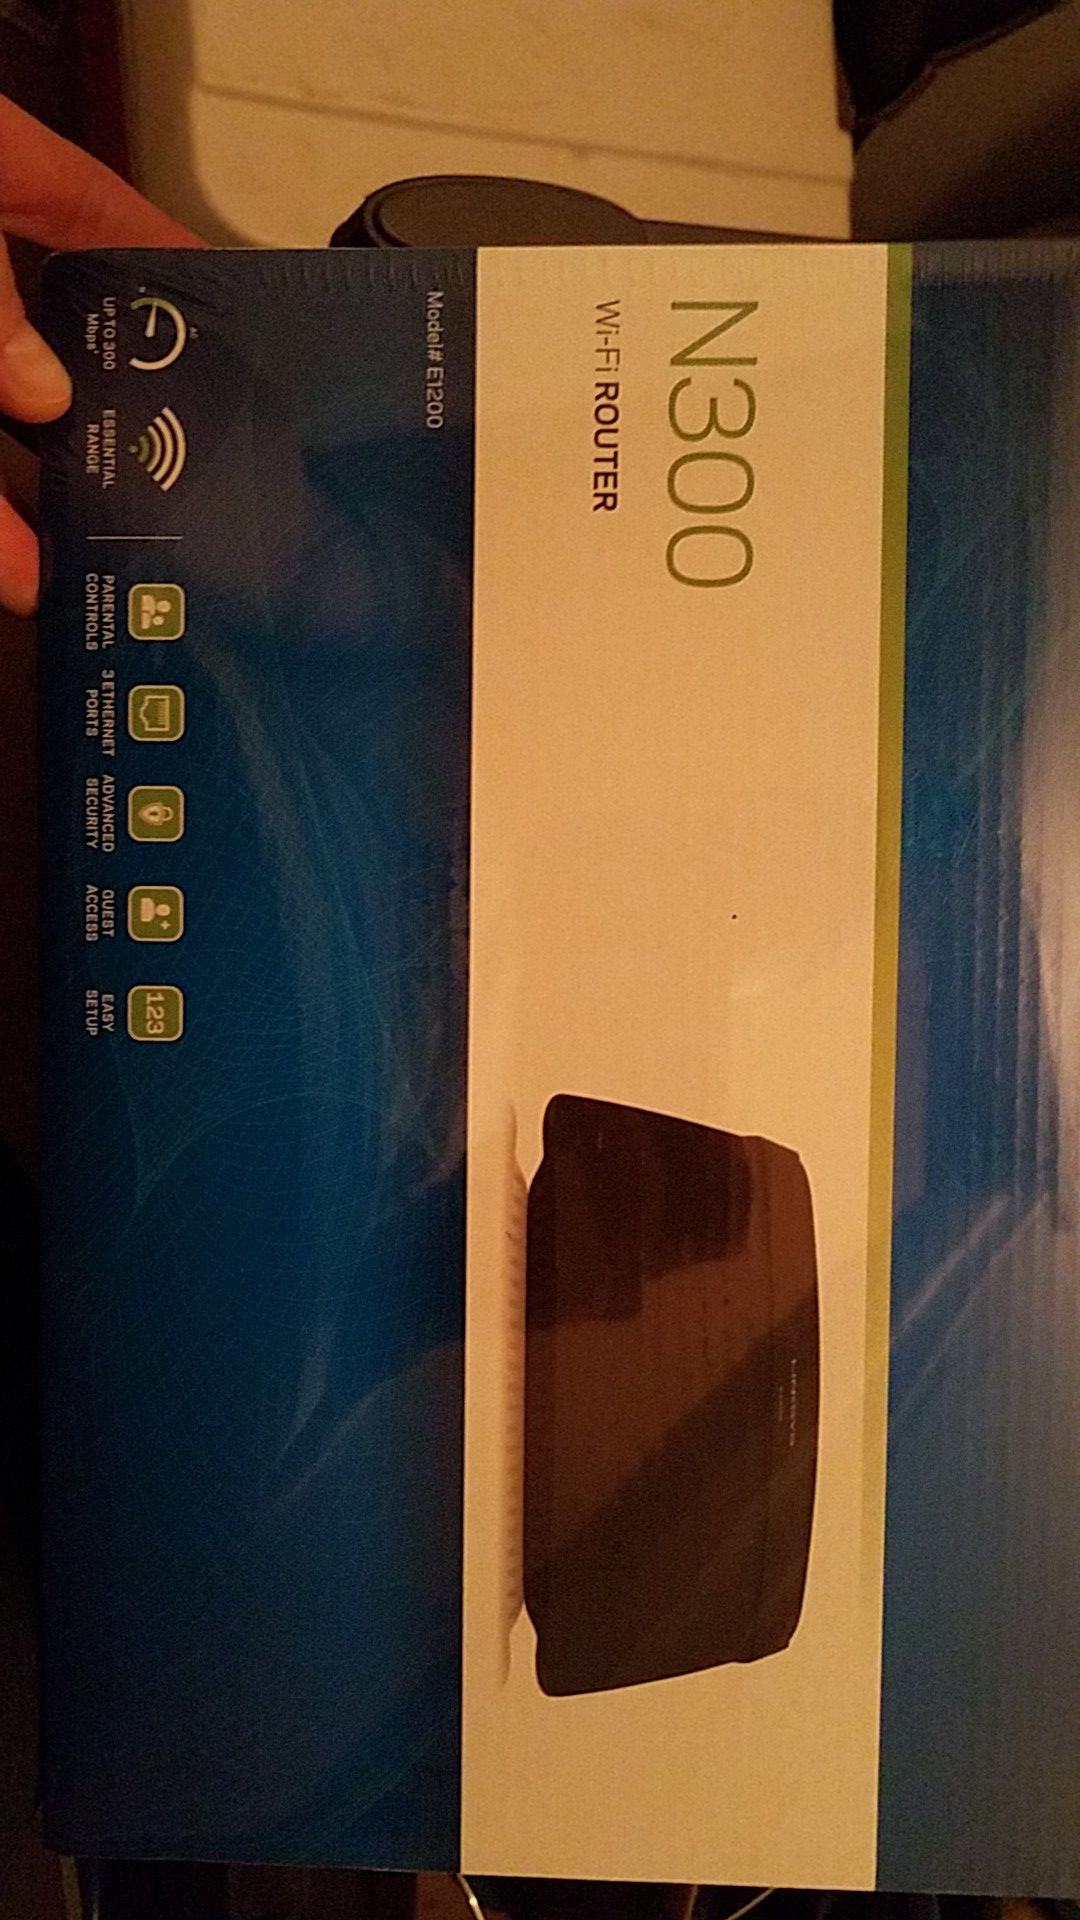 Linksys N300 Wifi Router $20